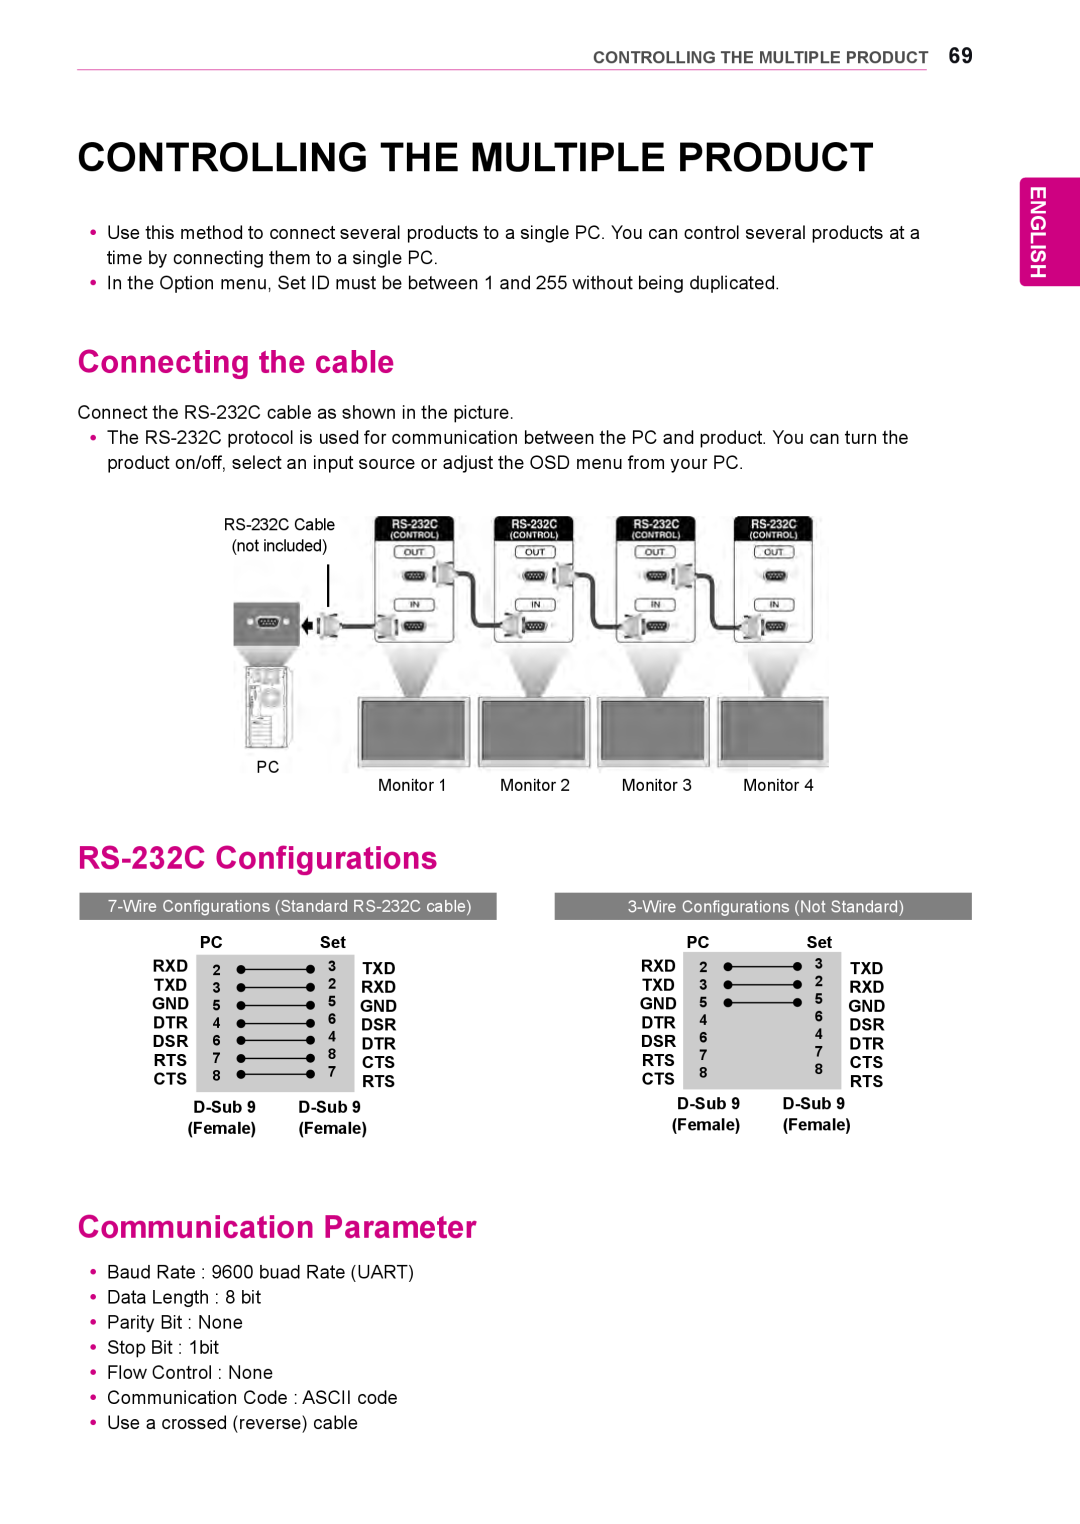 LG Electronics 47WS50MS, 42WS50MS Controlling The Multiple Product, Connecting the cable, RS-232C Configurations, English 